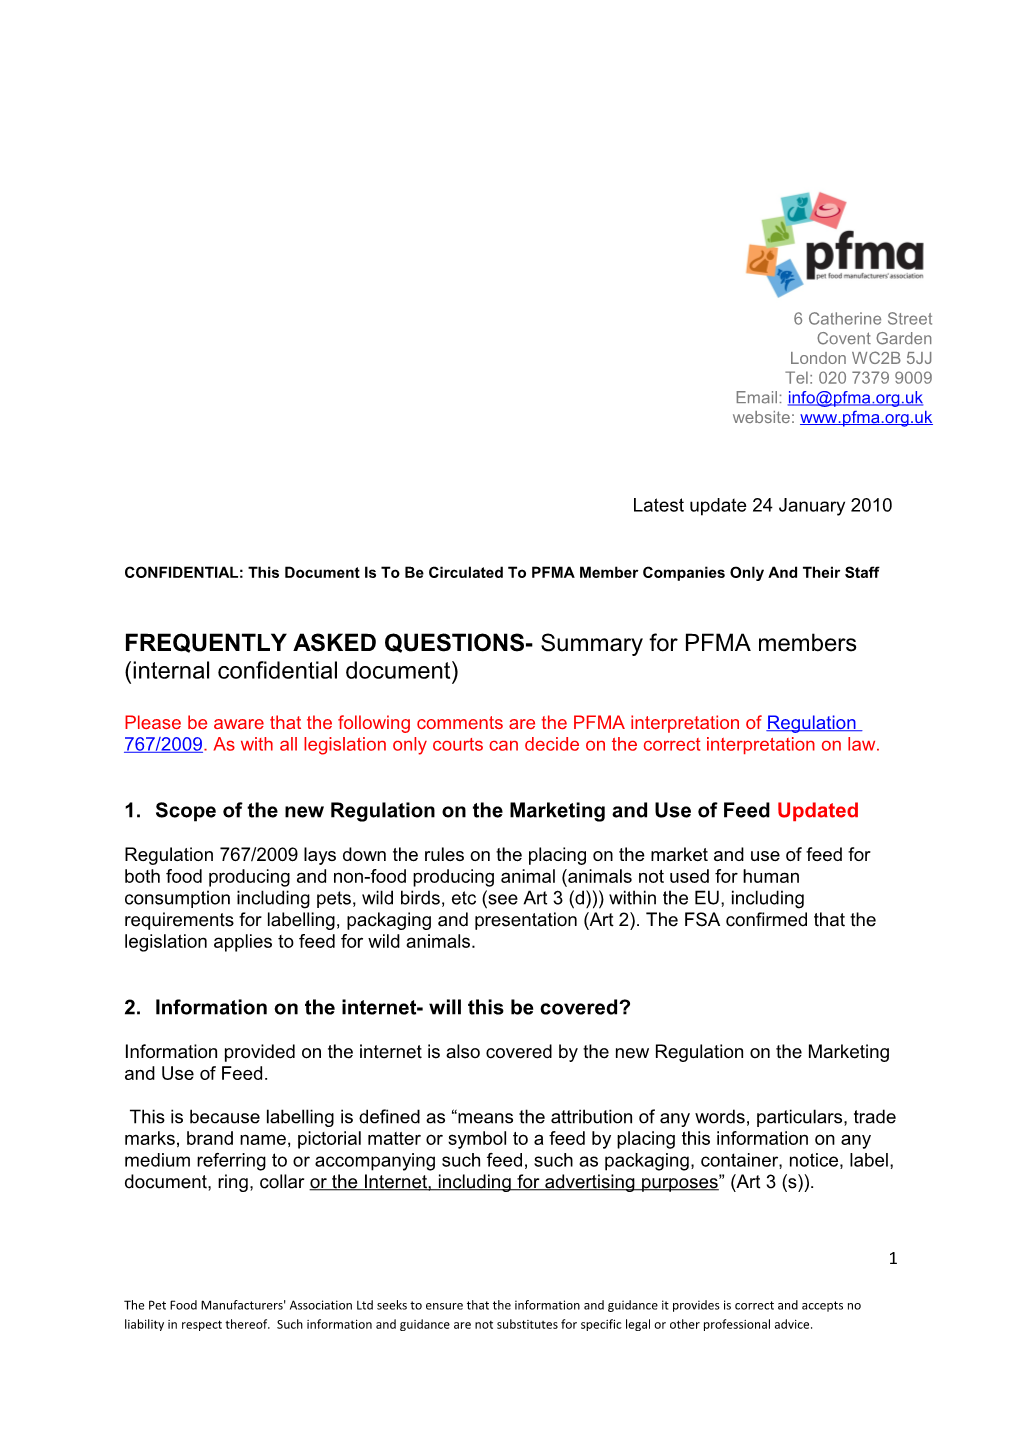 CONFIDENTIAL: This Document Is to Be Circulated to PFMA Member Companies Only and Their Staff